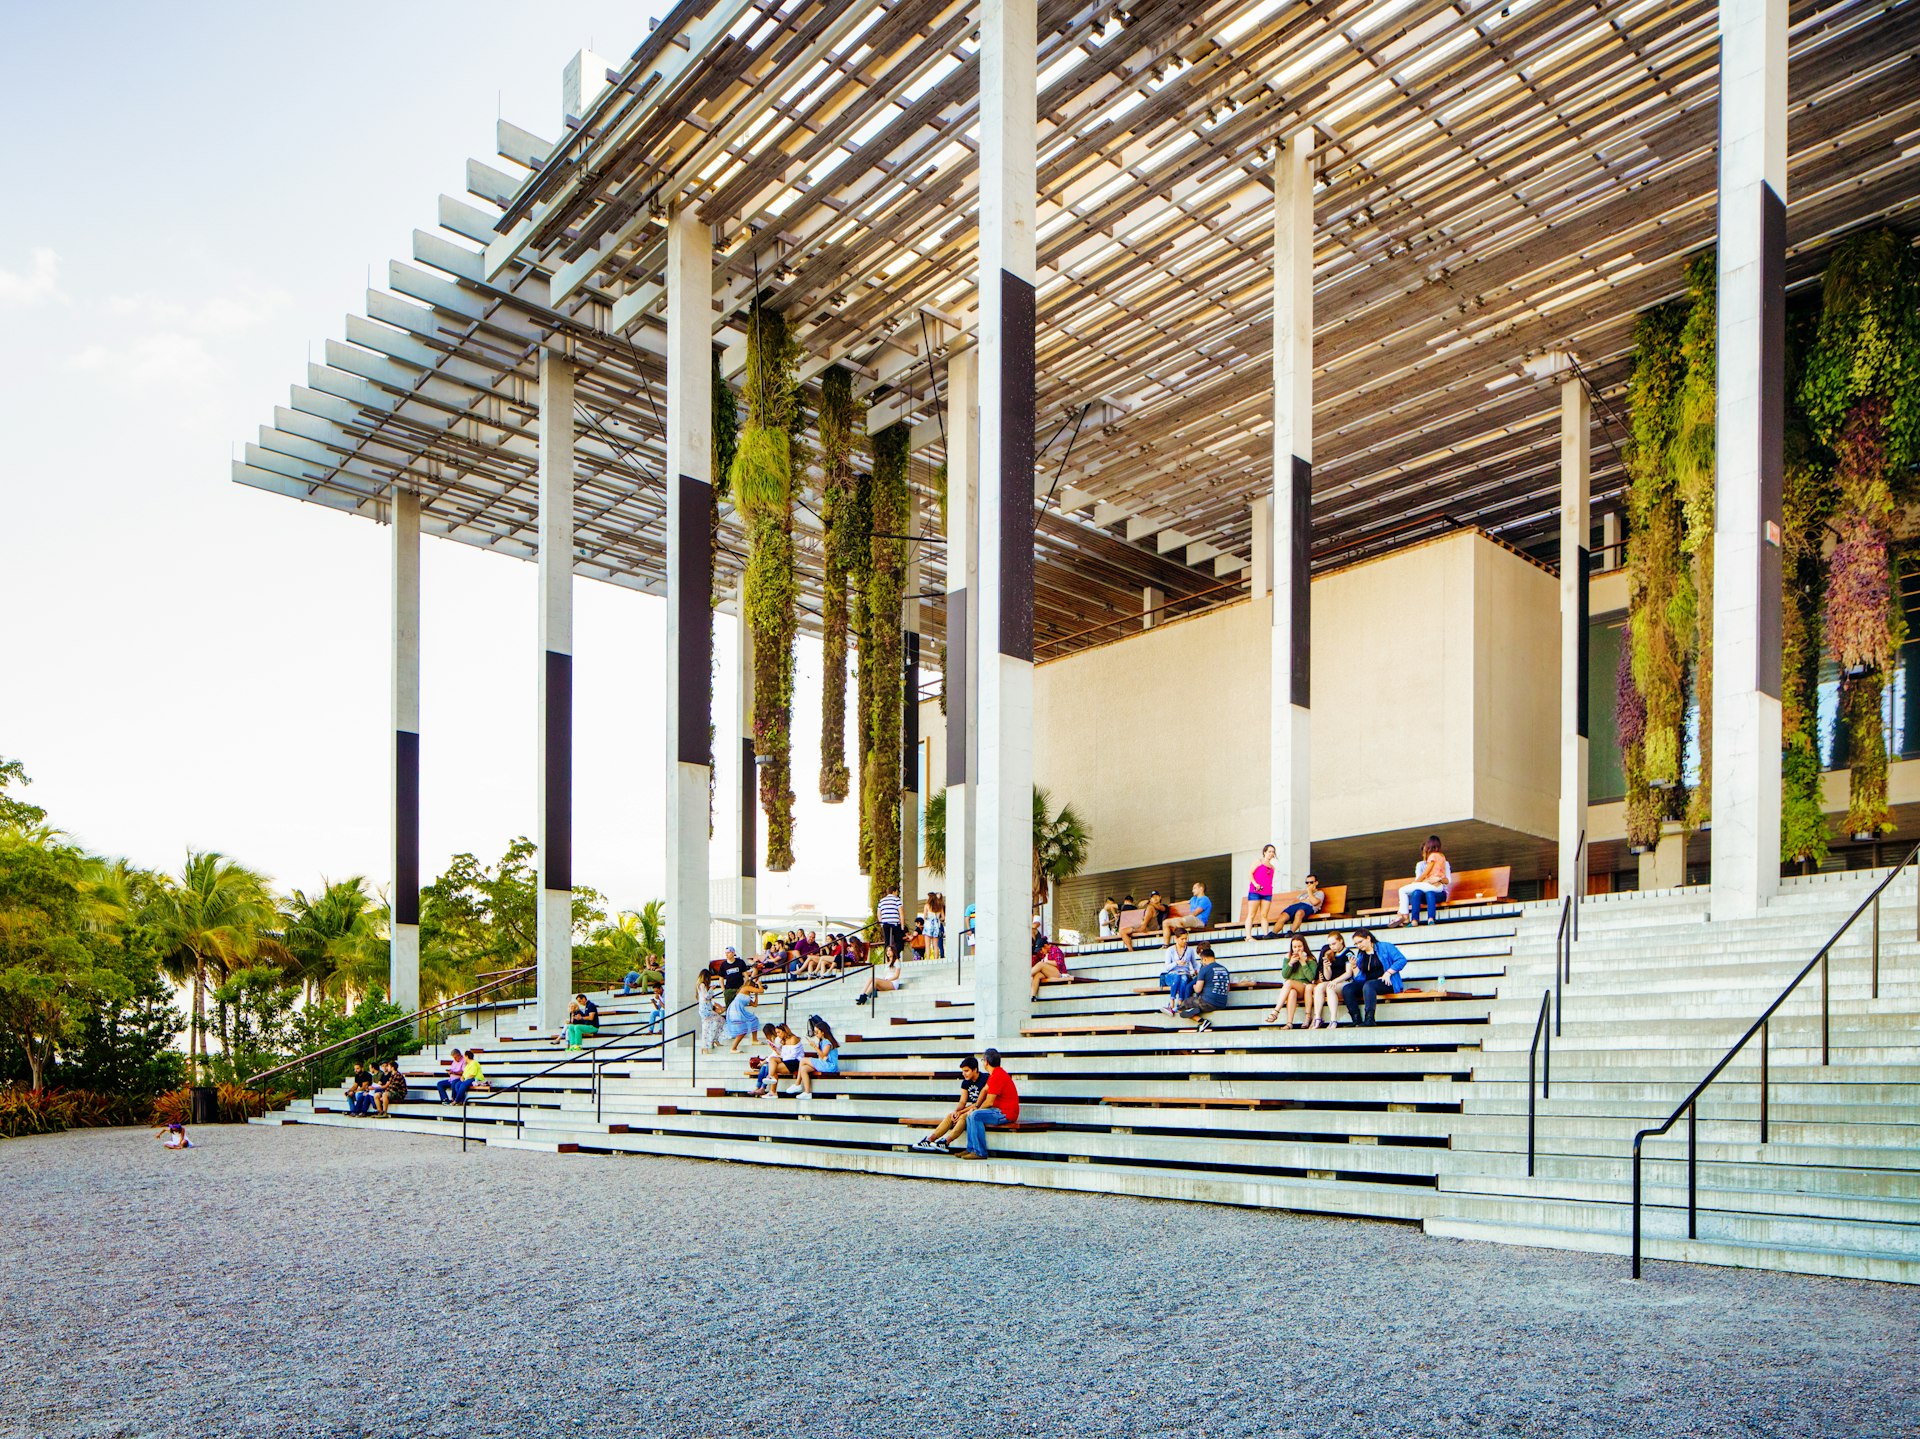 People sitting and walking up the stairs of the Pérez Art Museum in Miami, Florida